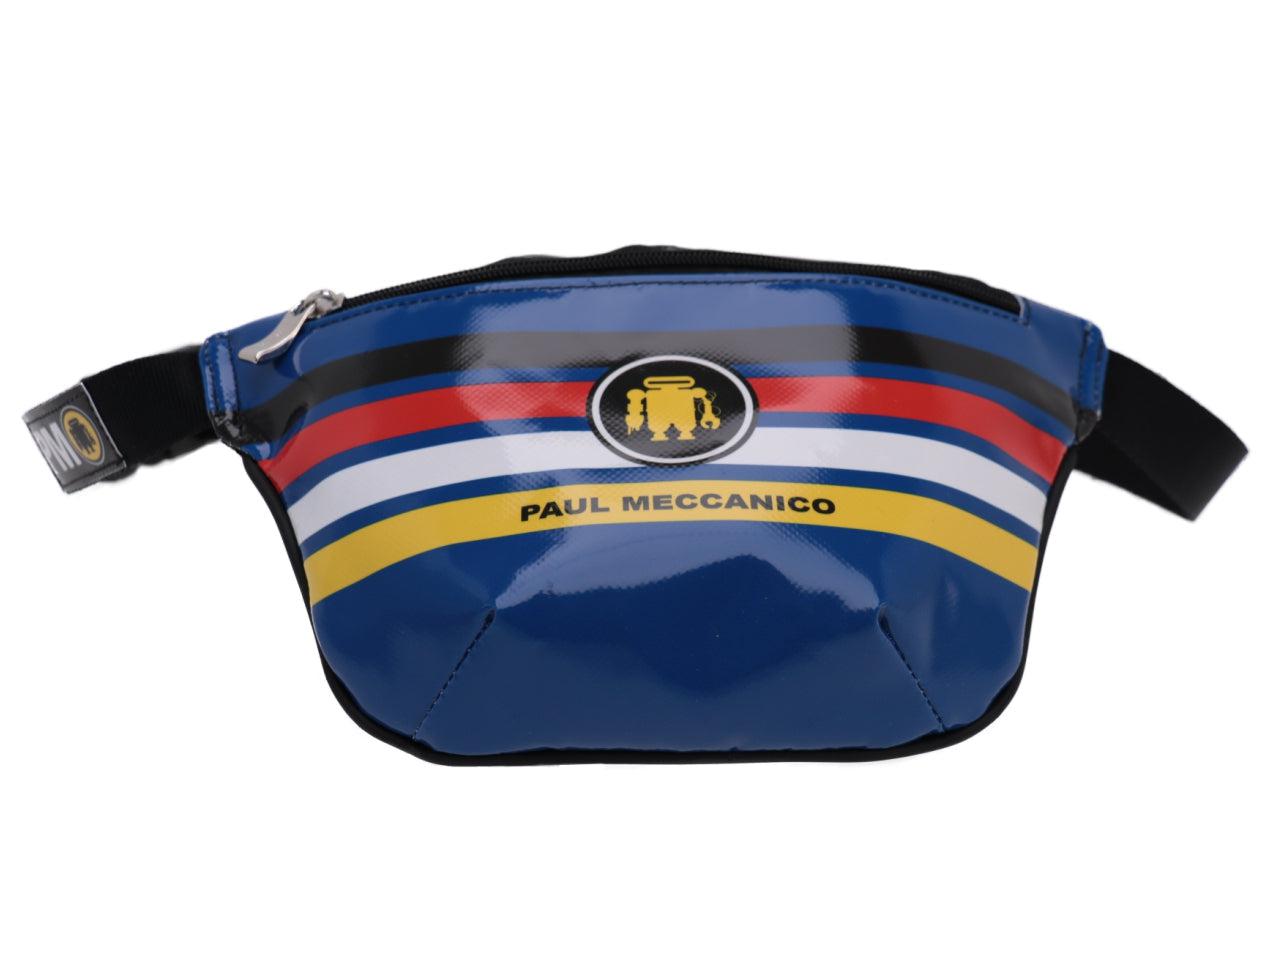 BLUE, BLACK, RED, WHITE AND YELLOW WAIST BAG . MODEL FLEX MADE OF LORRY TARPAULIN. - Limited Edition Paul Meccanico